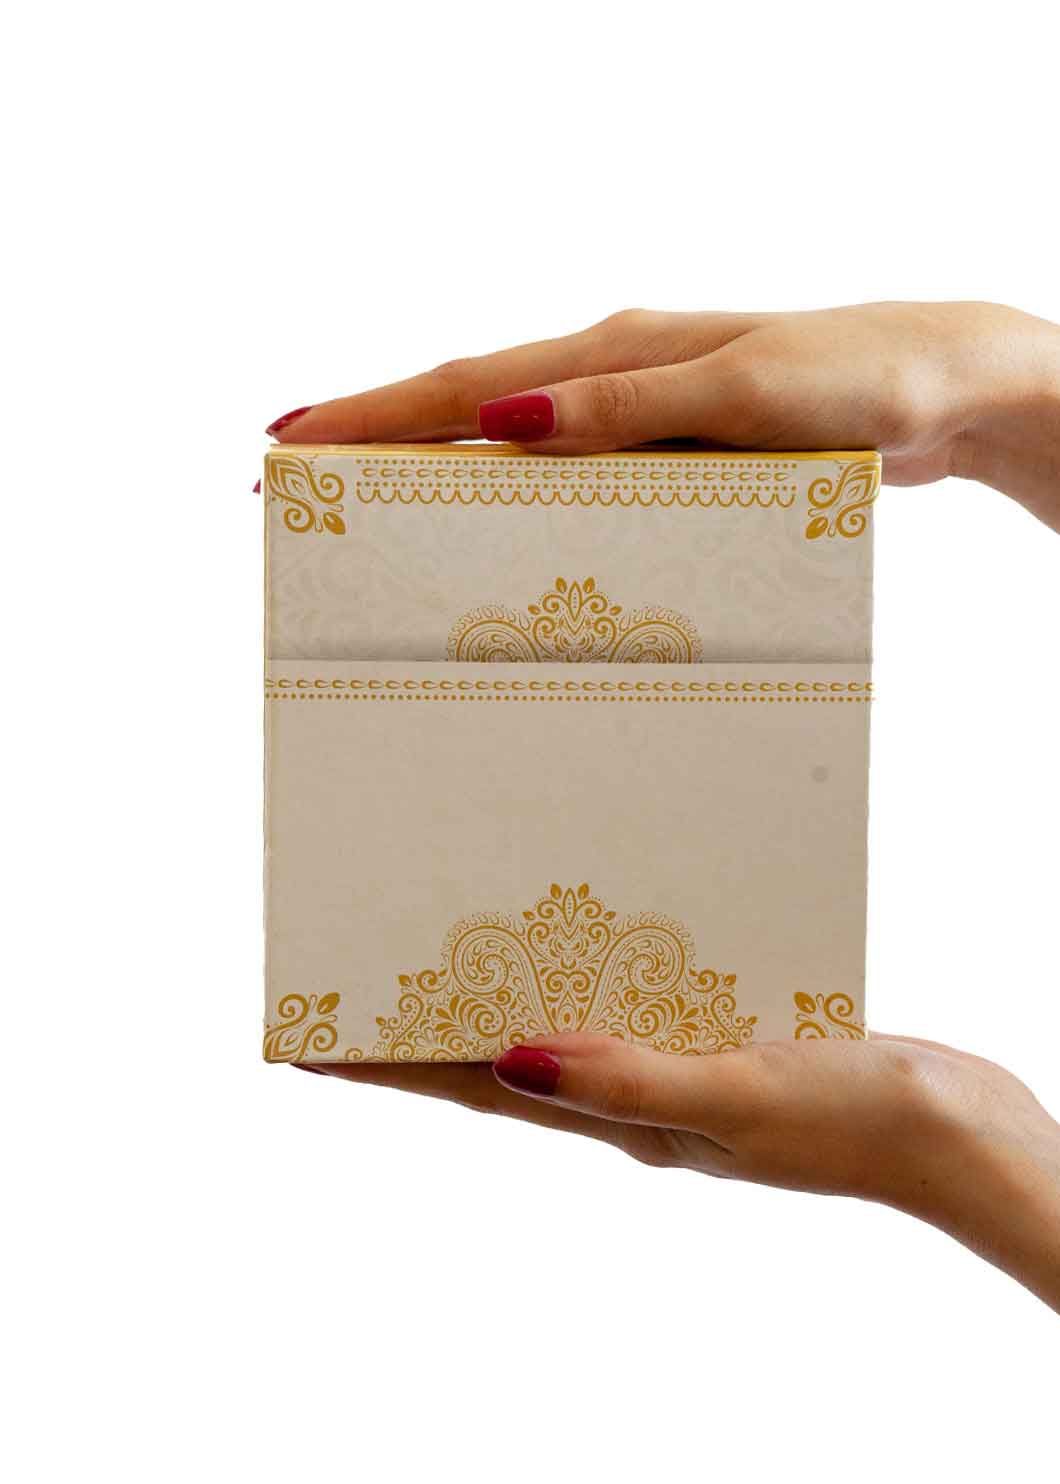 White and Golden Color Pattern Box for Packing Gifts